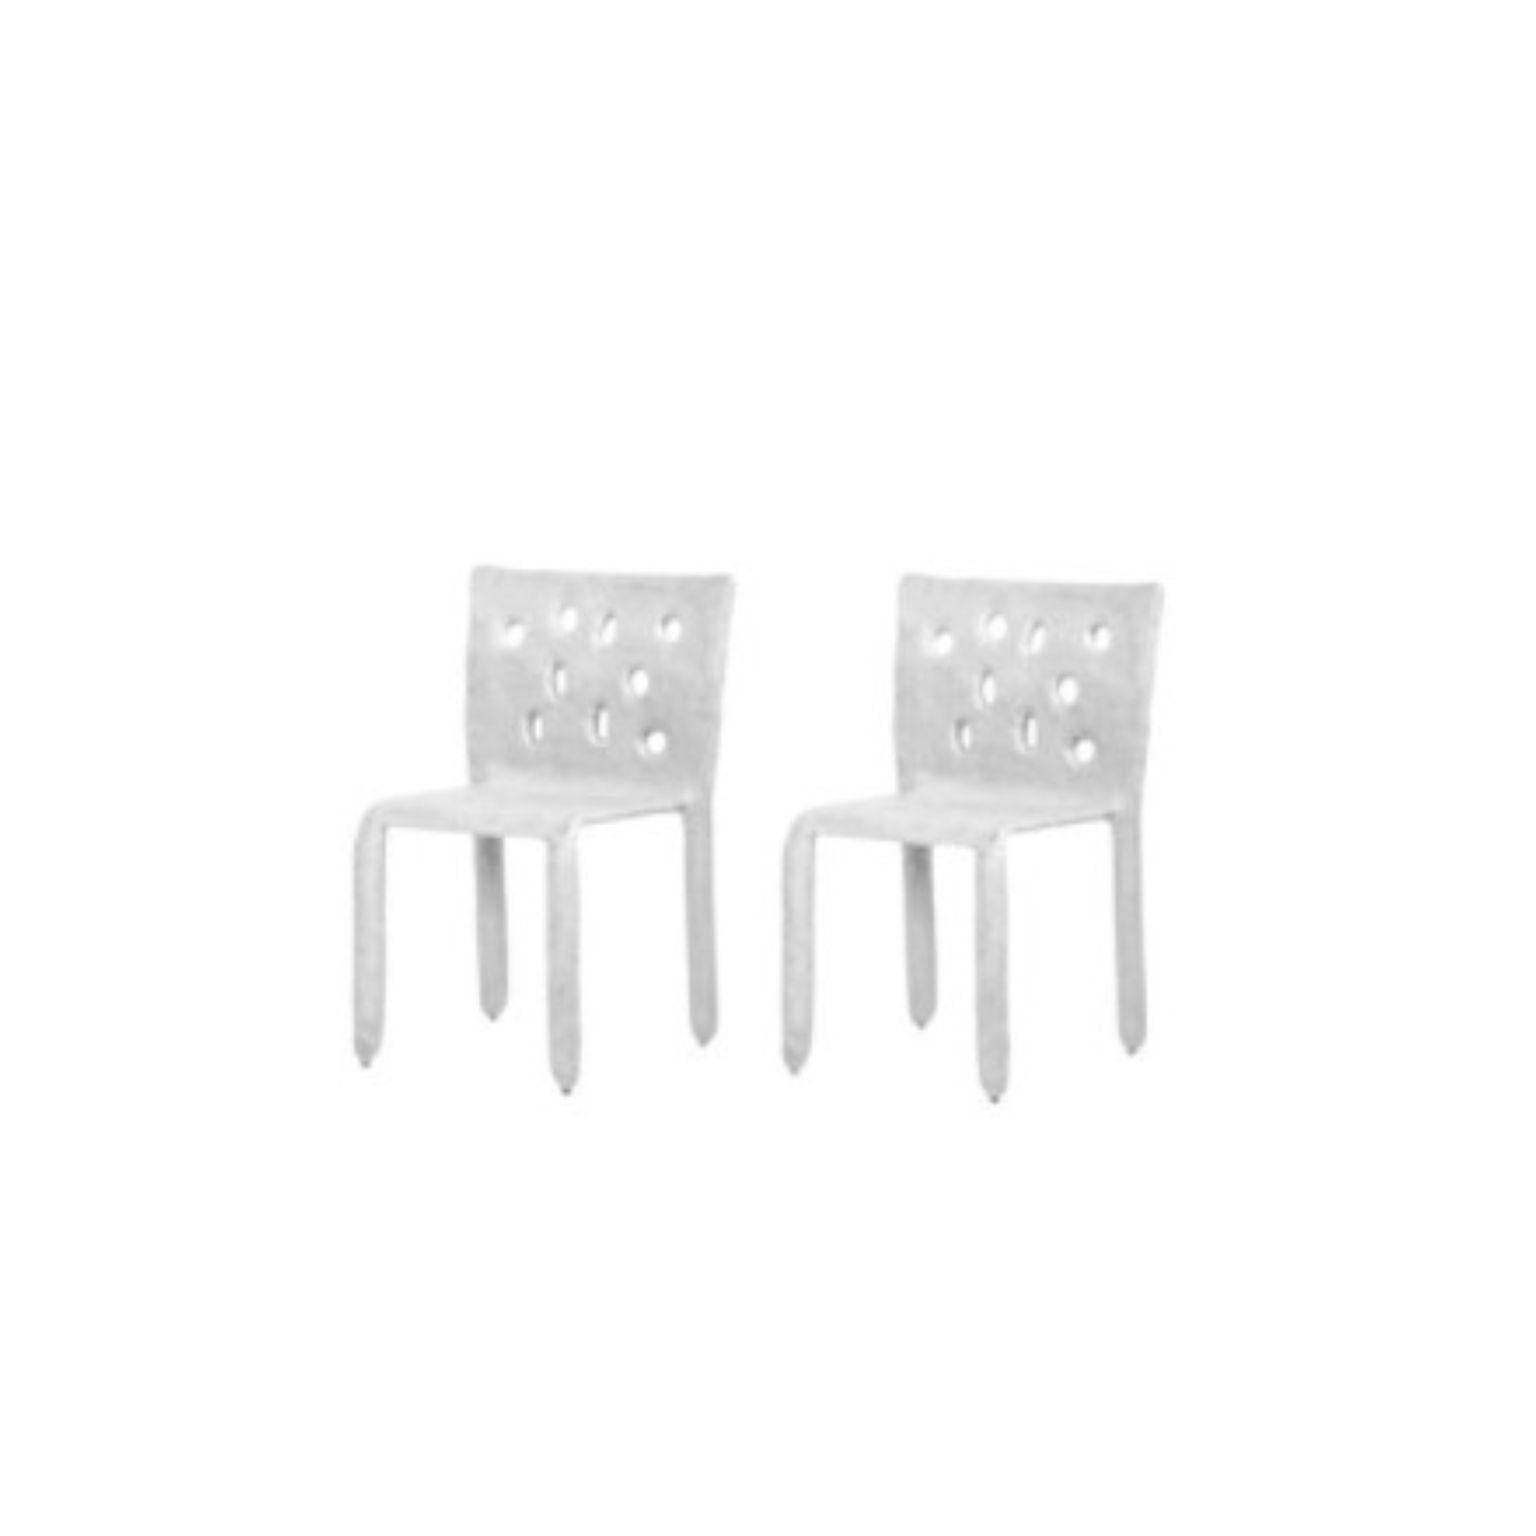 Set of 2 white sculpted contemporary chairs by Faina
Design: Victoriya Yakusha
Material: Steel, flax rubber, biopolymer, cellulose
Dimensions: Height 82 x width 54 x legs depth 45 cm
 Weight: 15 kilos.

Made in the style of ethnic minimalism,